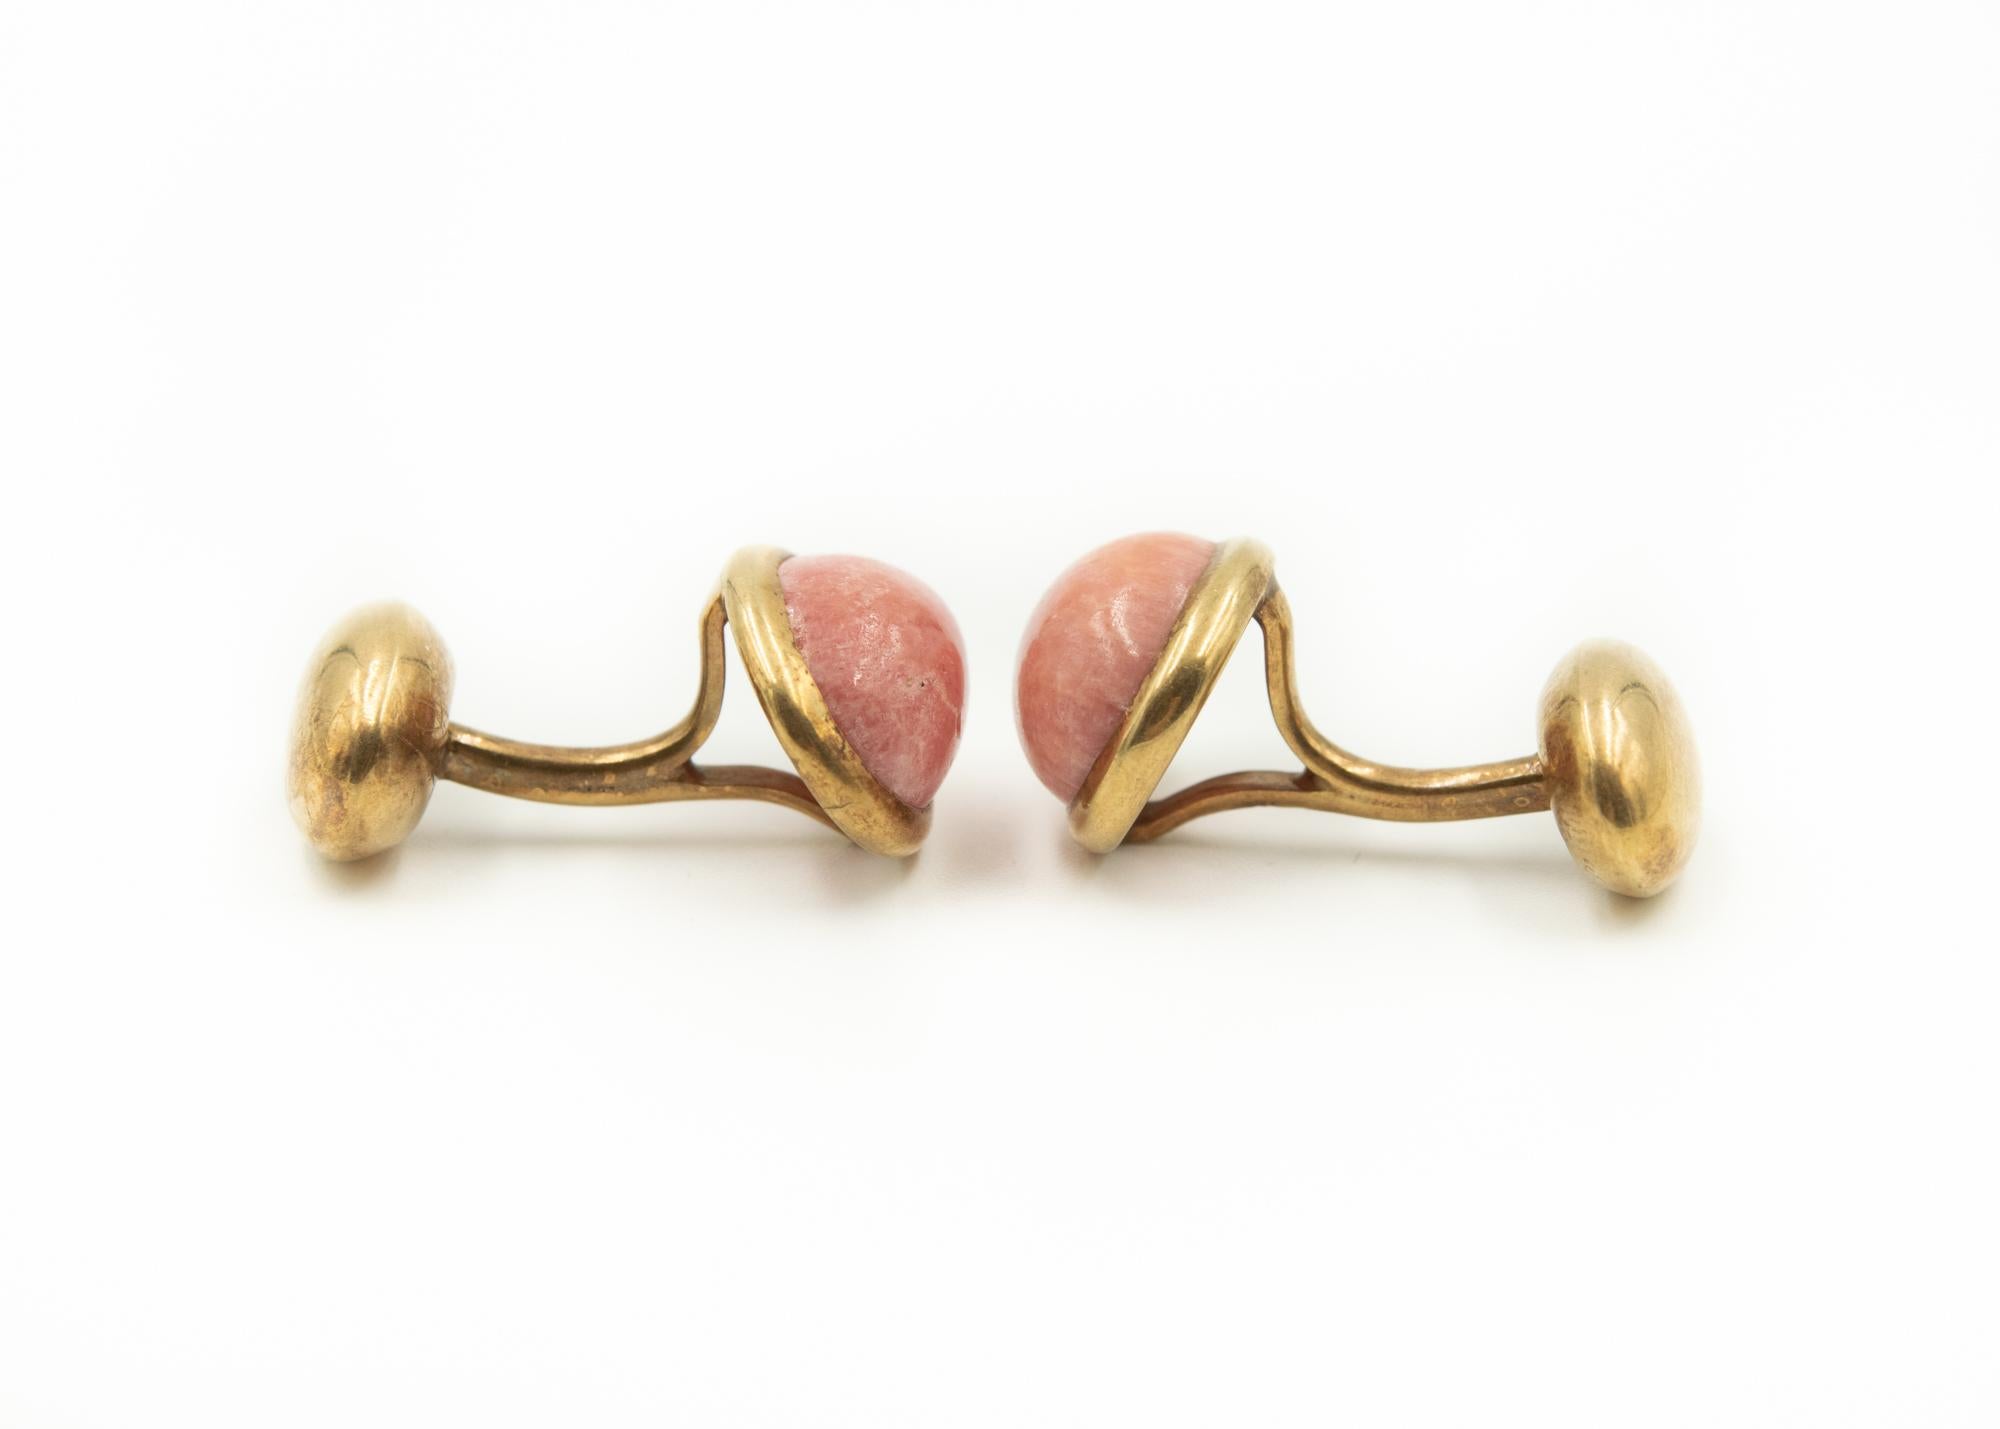 Antique cufflinks featuring oval pink rhodochrosite cabochons (measuring approximately 12mm x 8.5mm) set in an oval gold bezel.  On the other side is a smaller oval gold section.  The back is stationary and must be pushed through the slat in the